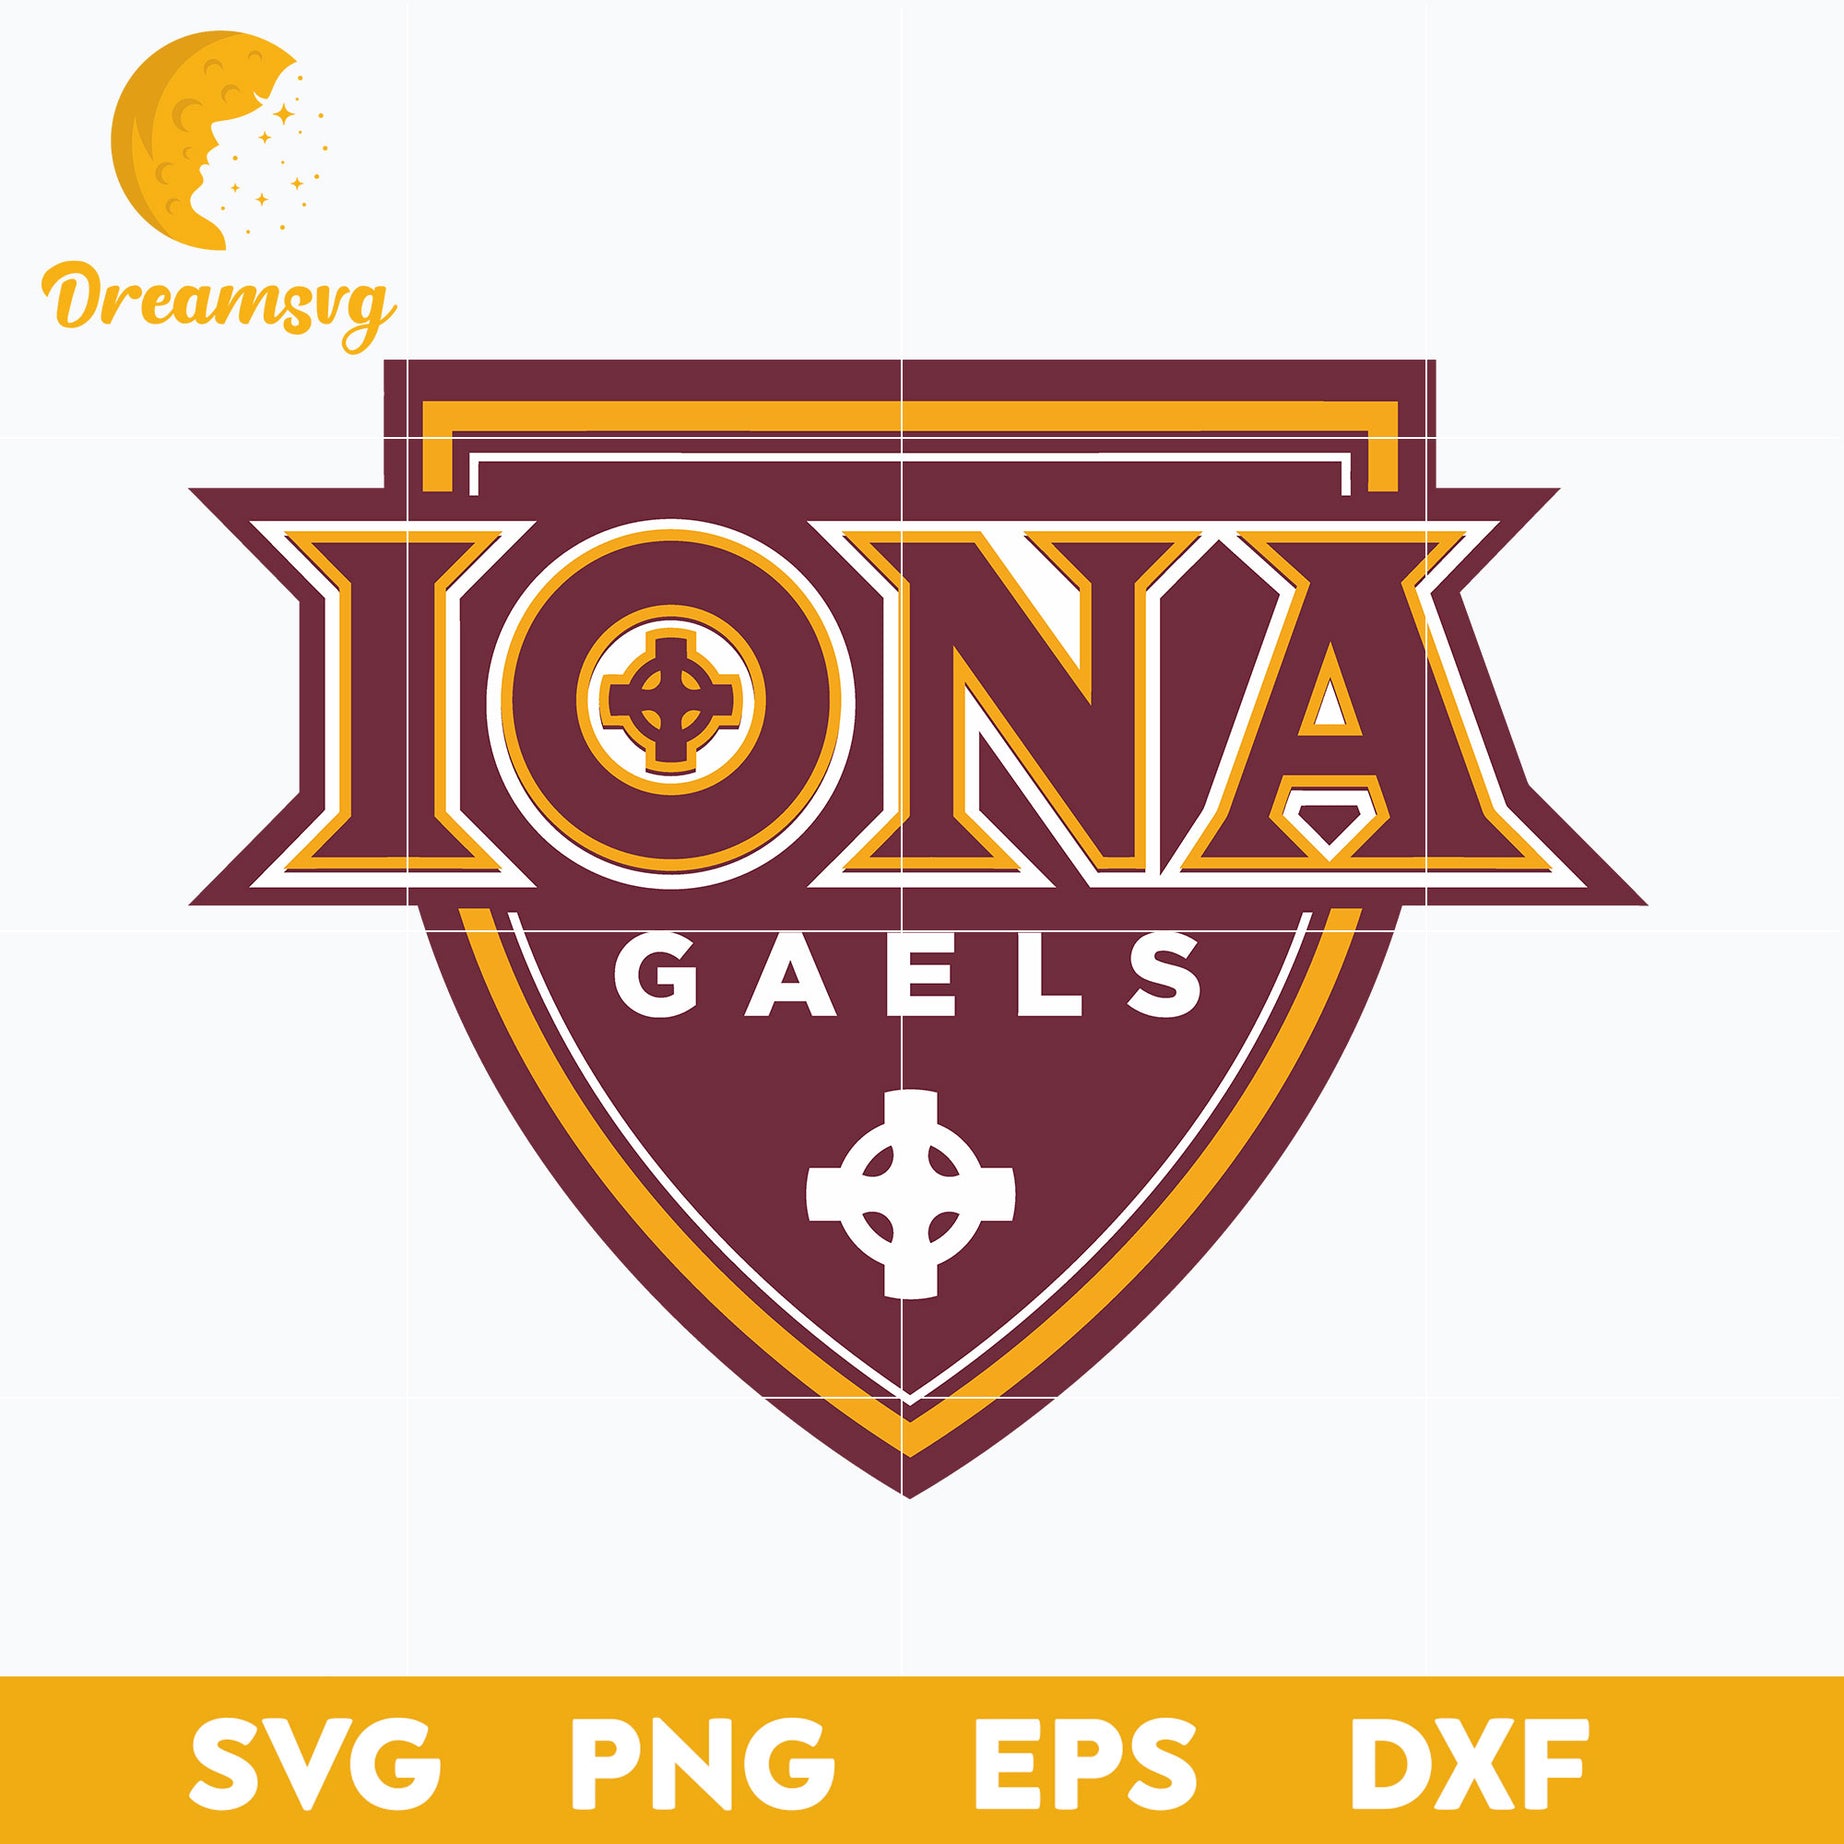 Iona Gaels Sycamores Svg, Logo Ncaa Sport Svg, Ncaa Svg, Png, Dxf, Eps Download File.